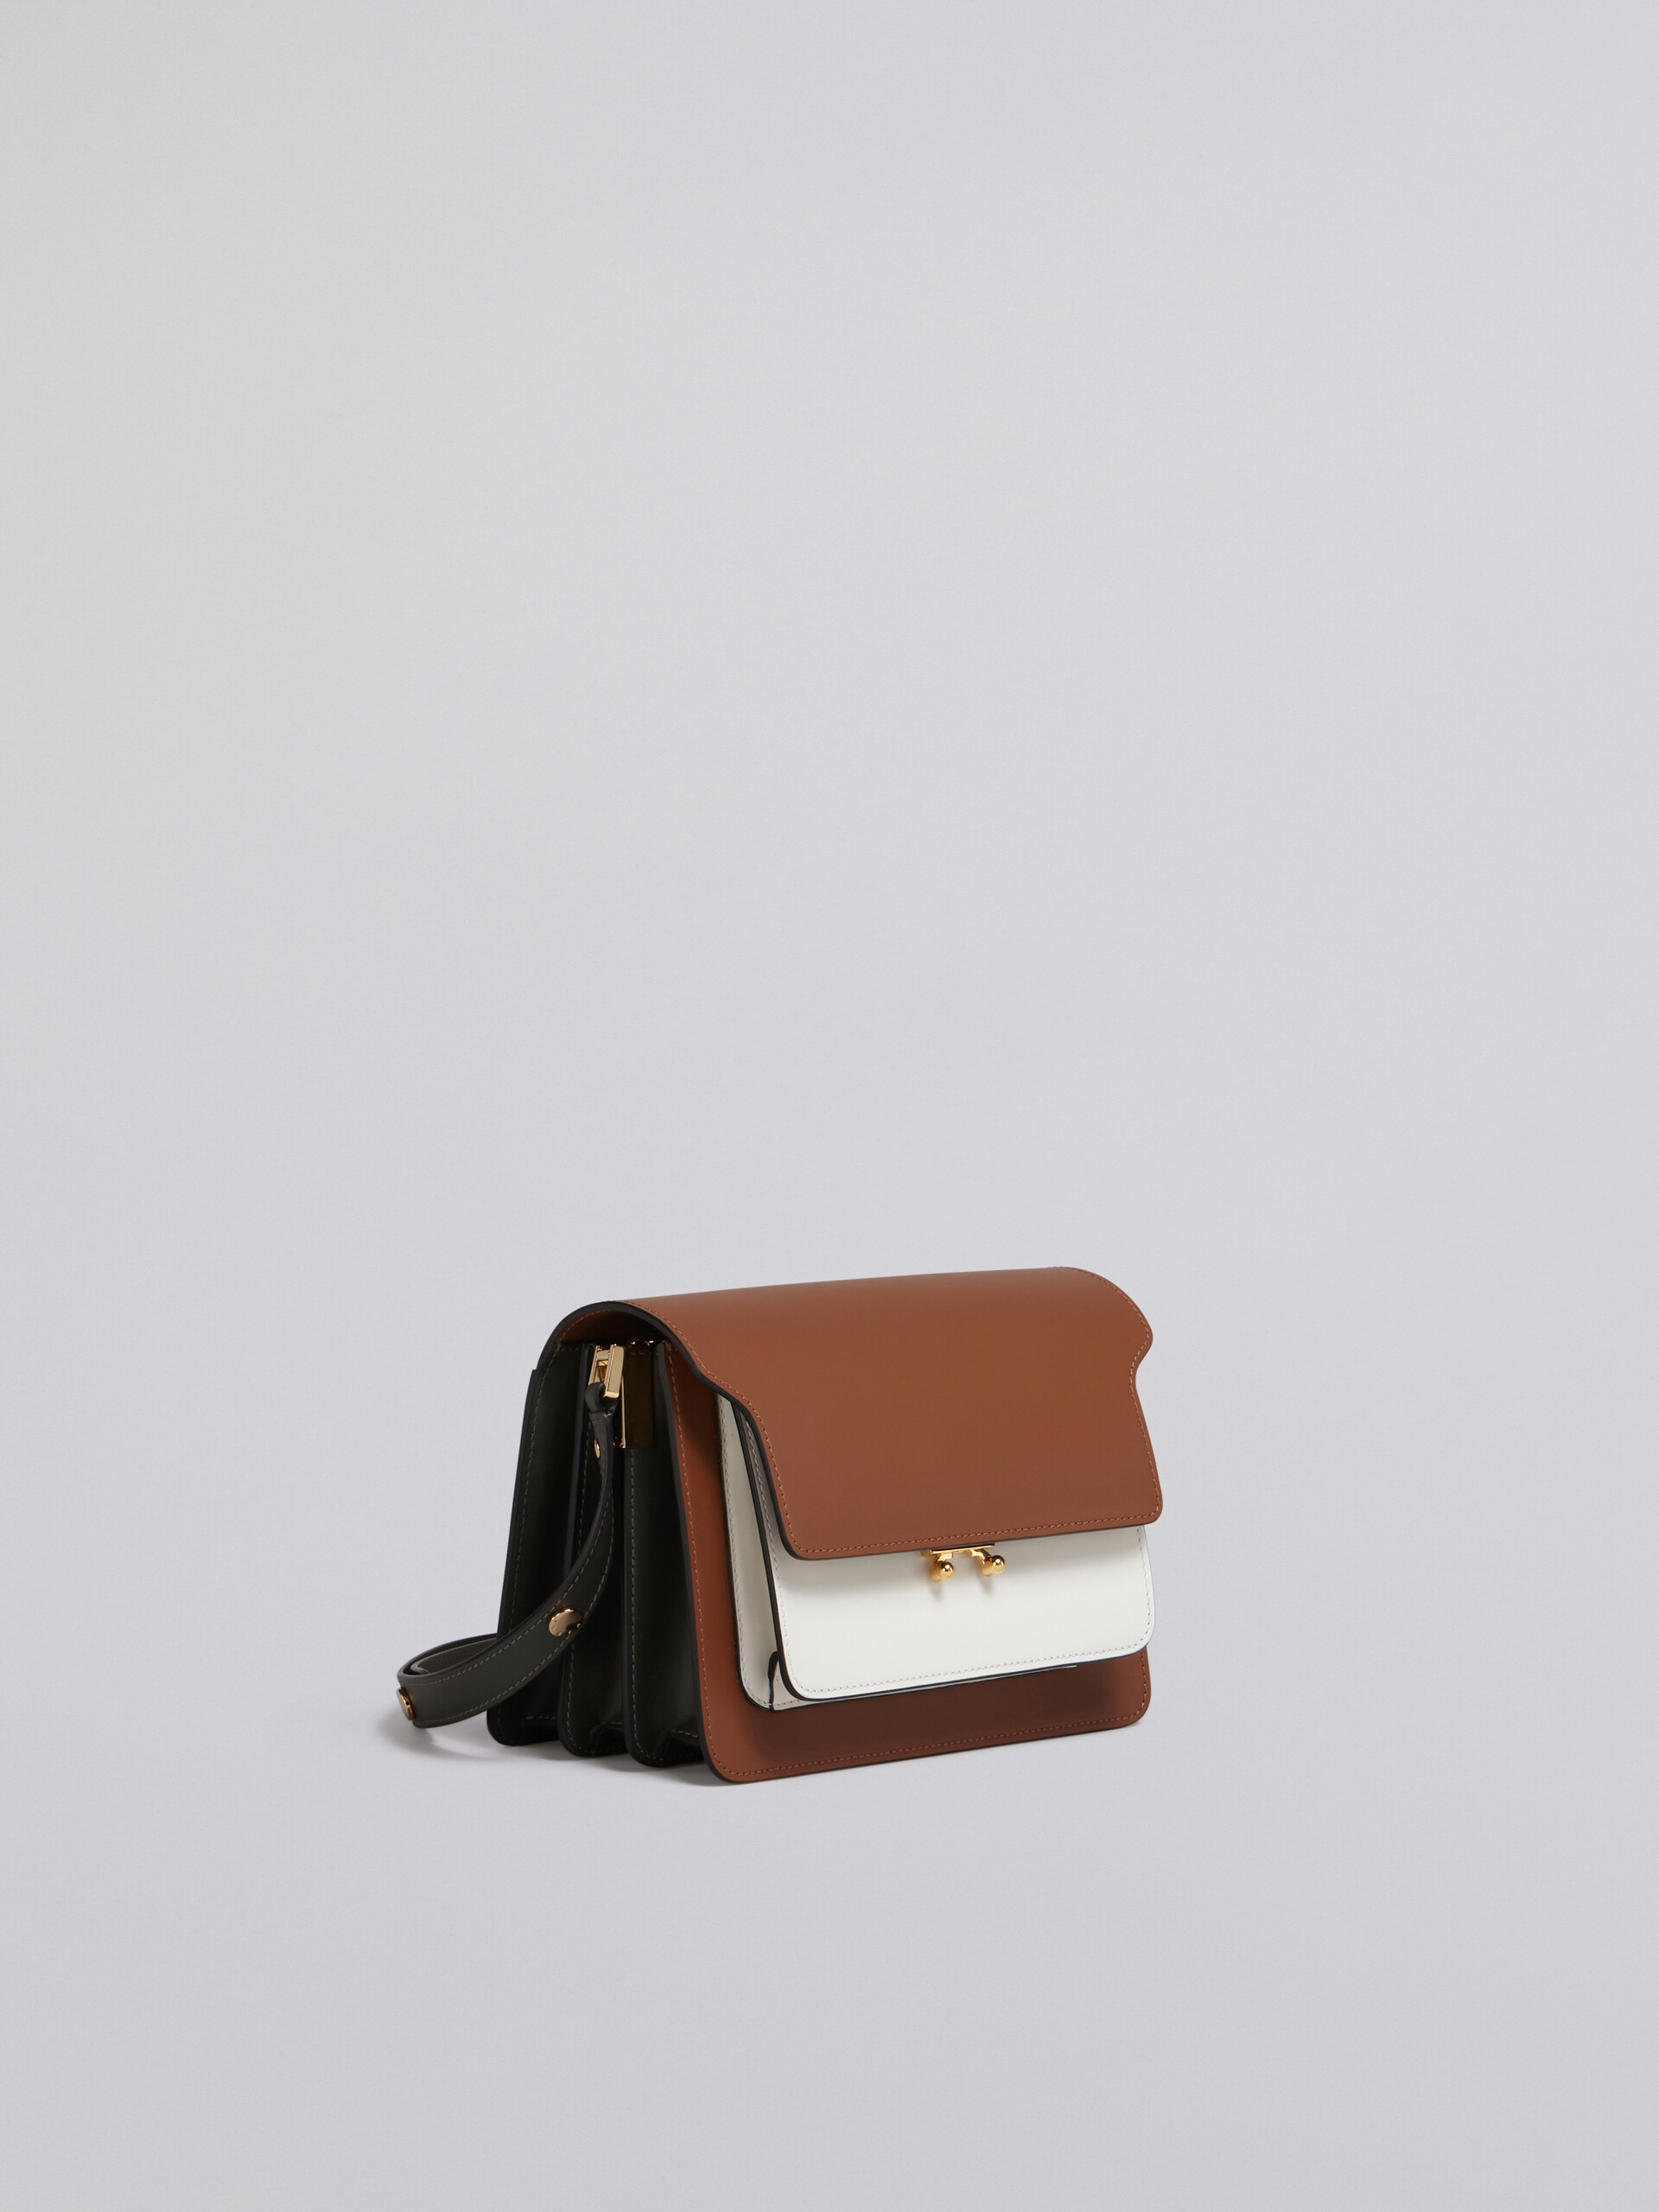 TRUNK media bag in brown white and green leather